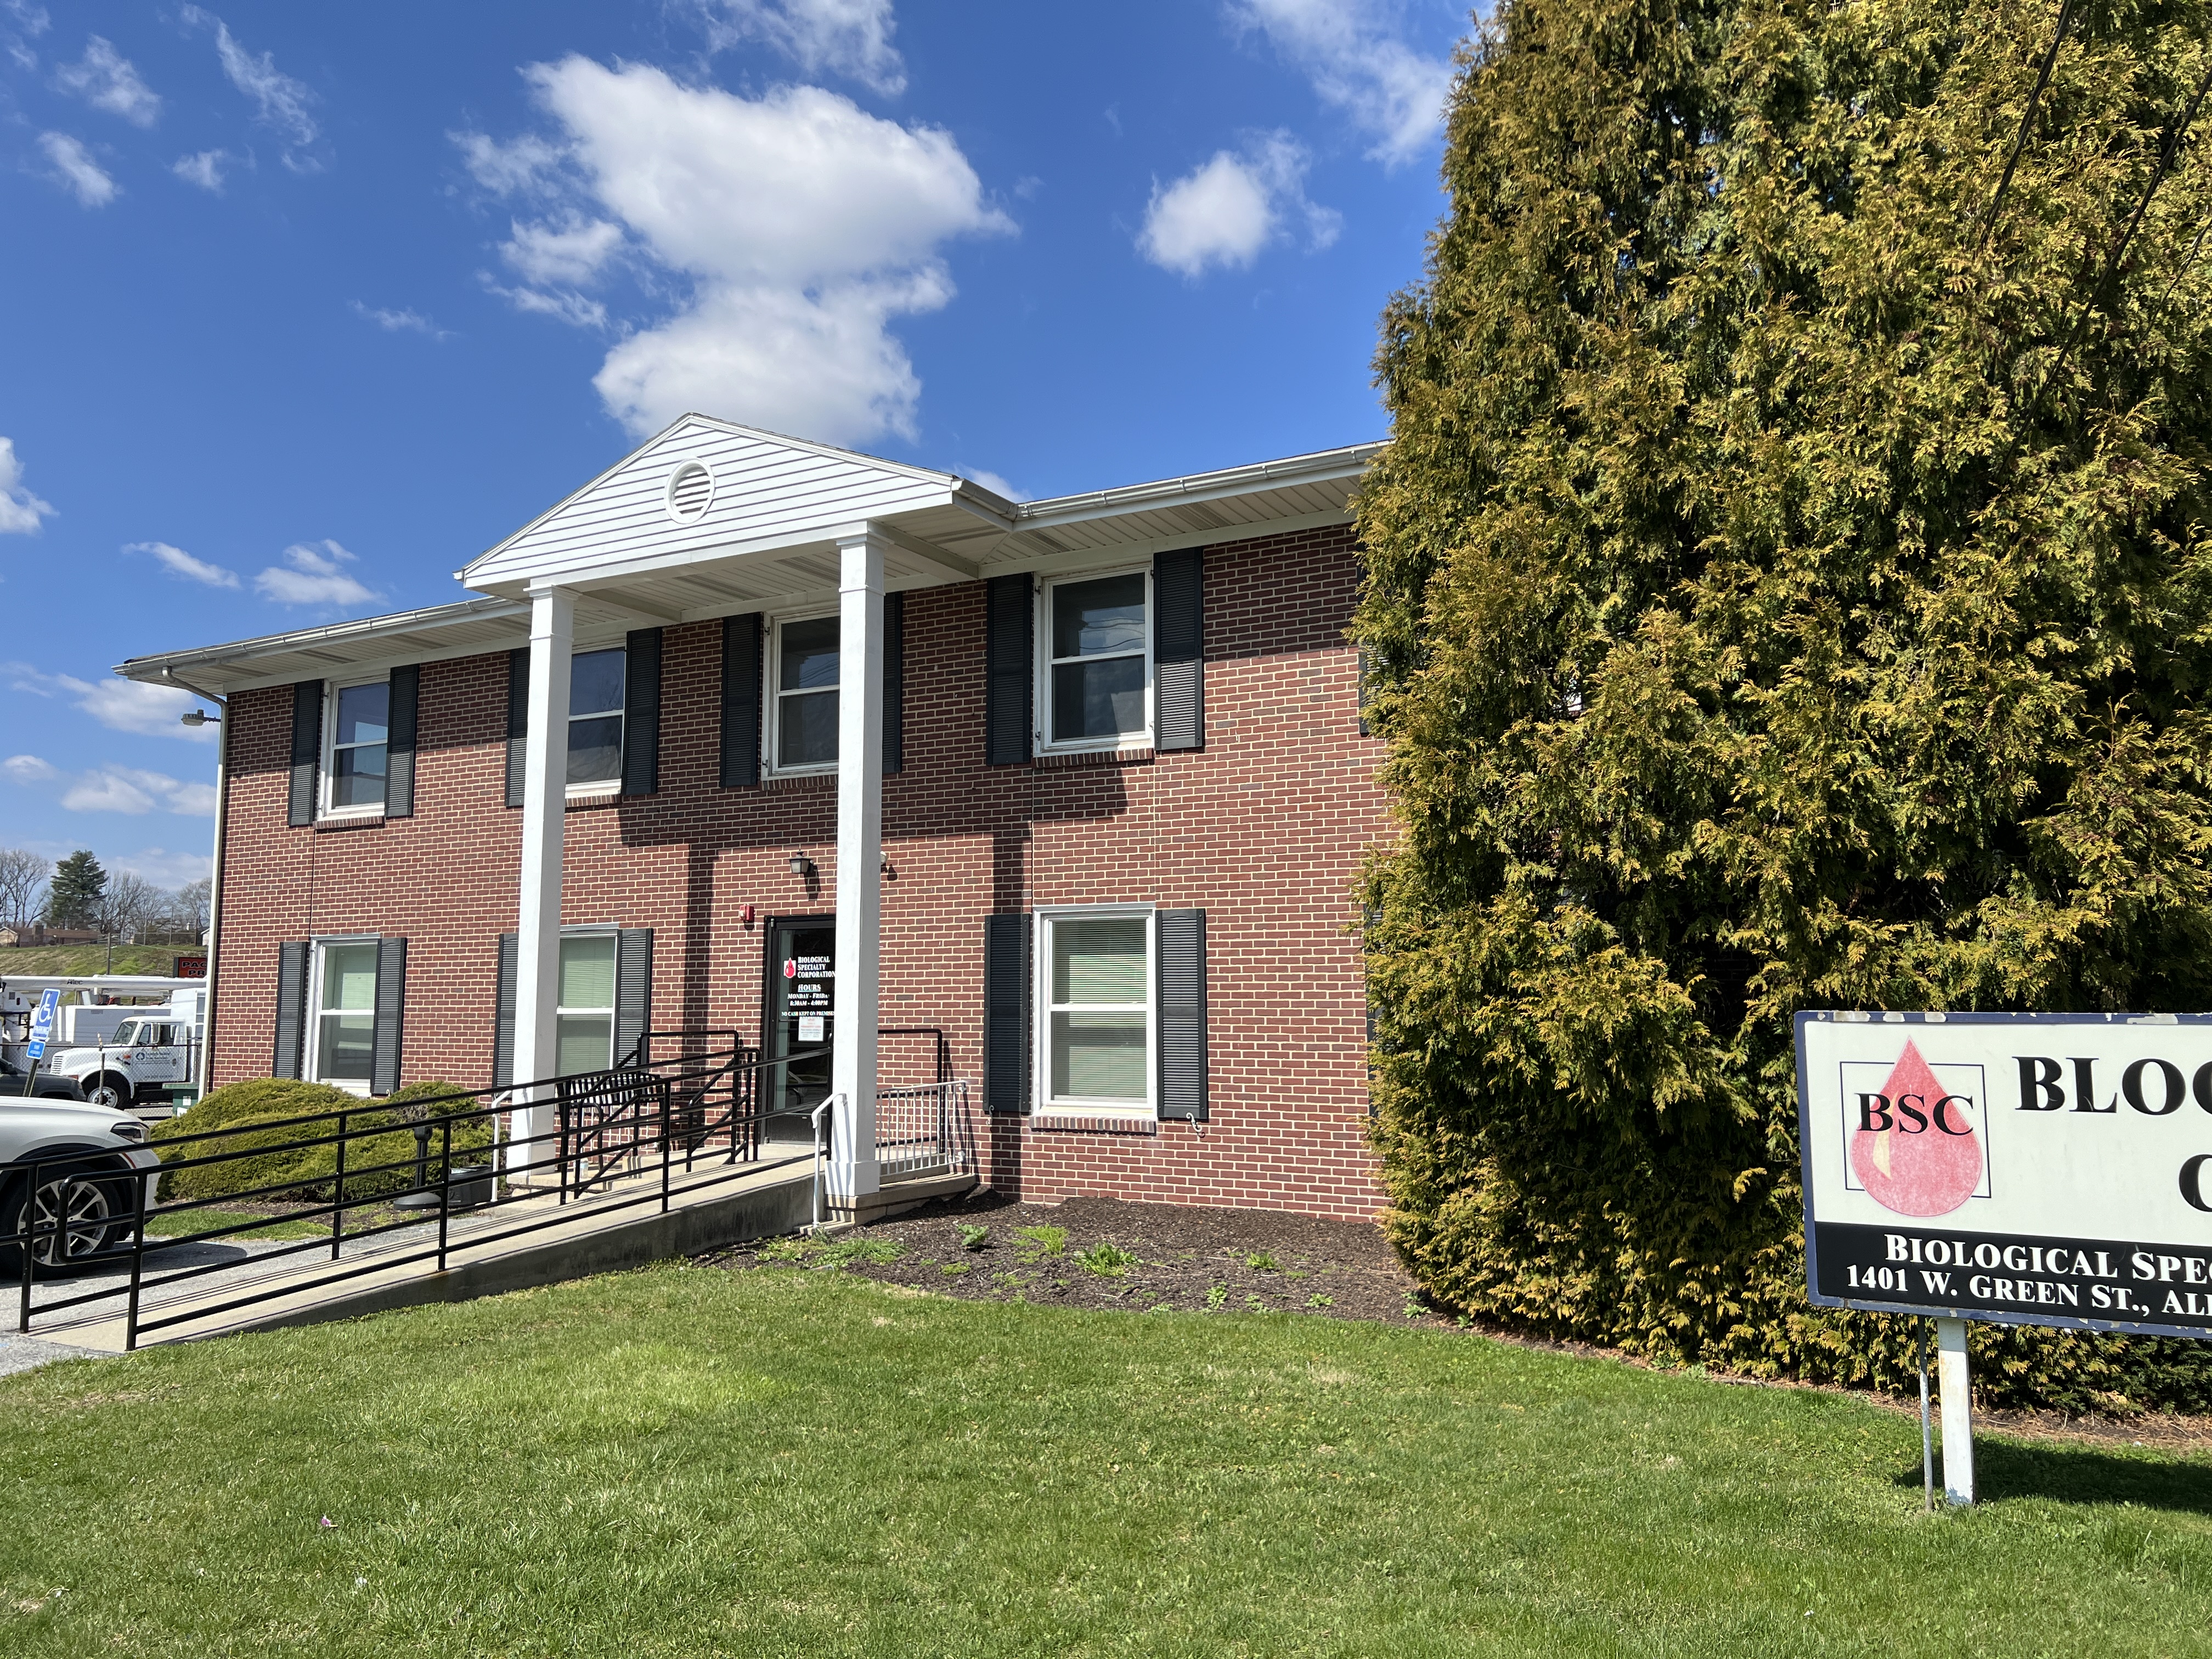 1401 W Green St, Allentown, Pennsylvania 18102, ,Office,For Sale and For Lease,1401 W Green St,1099